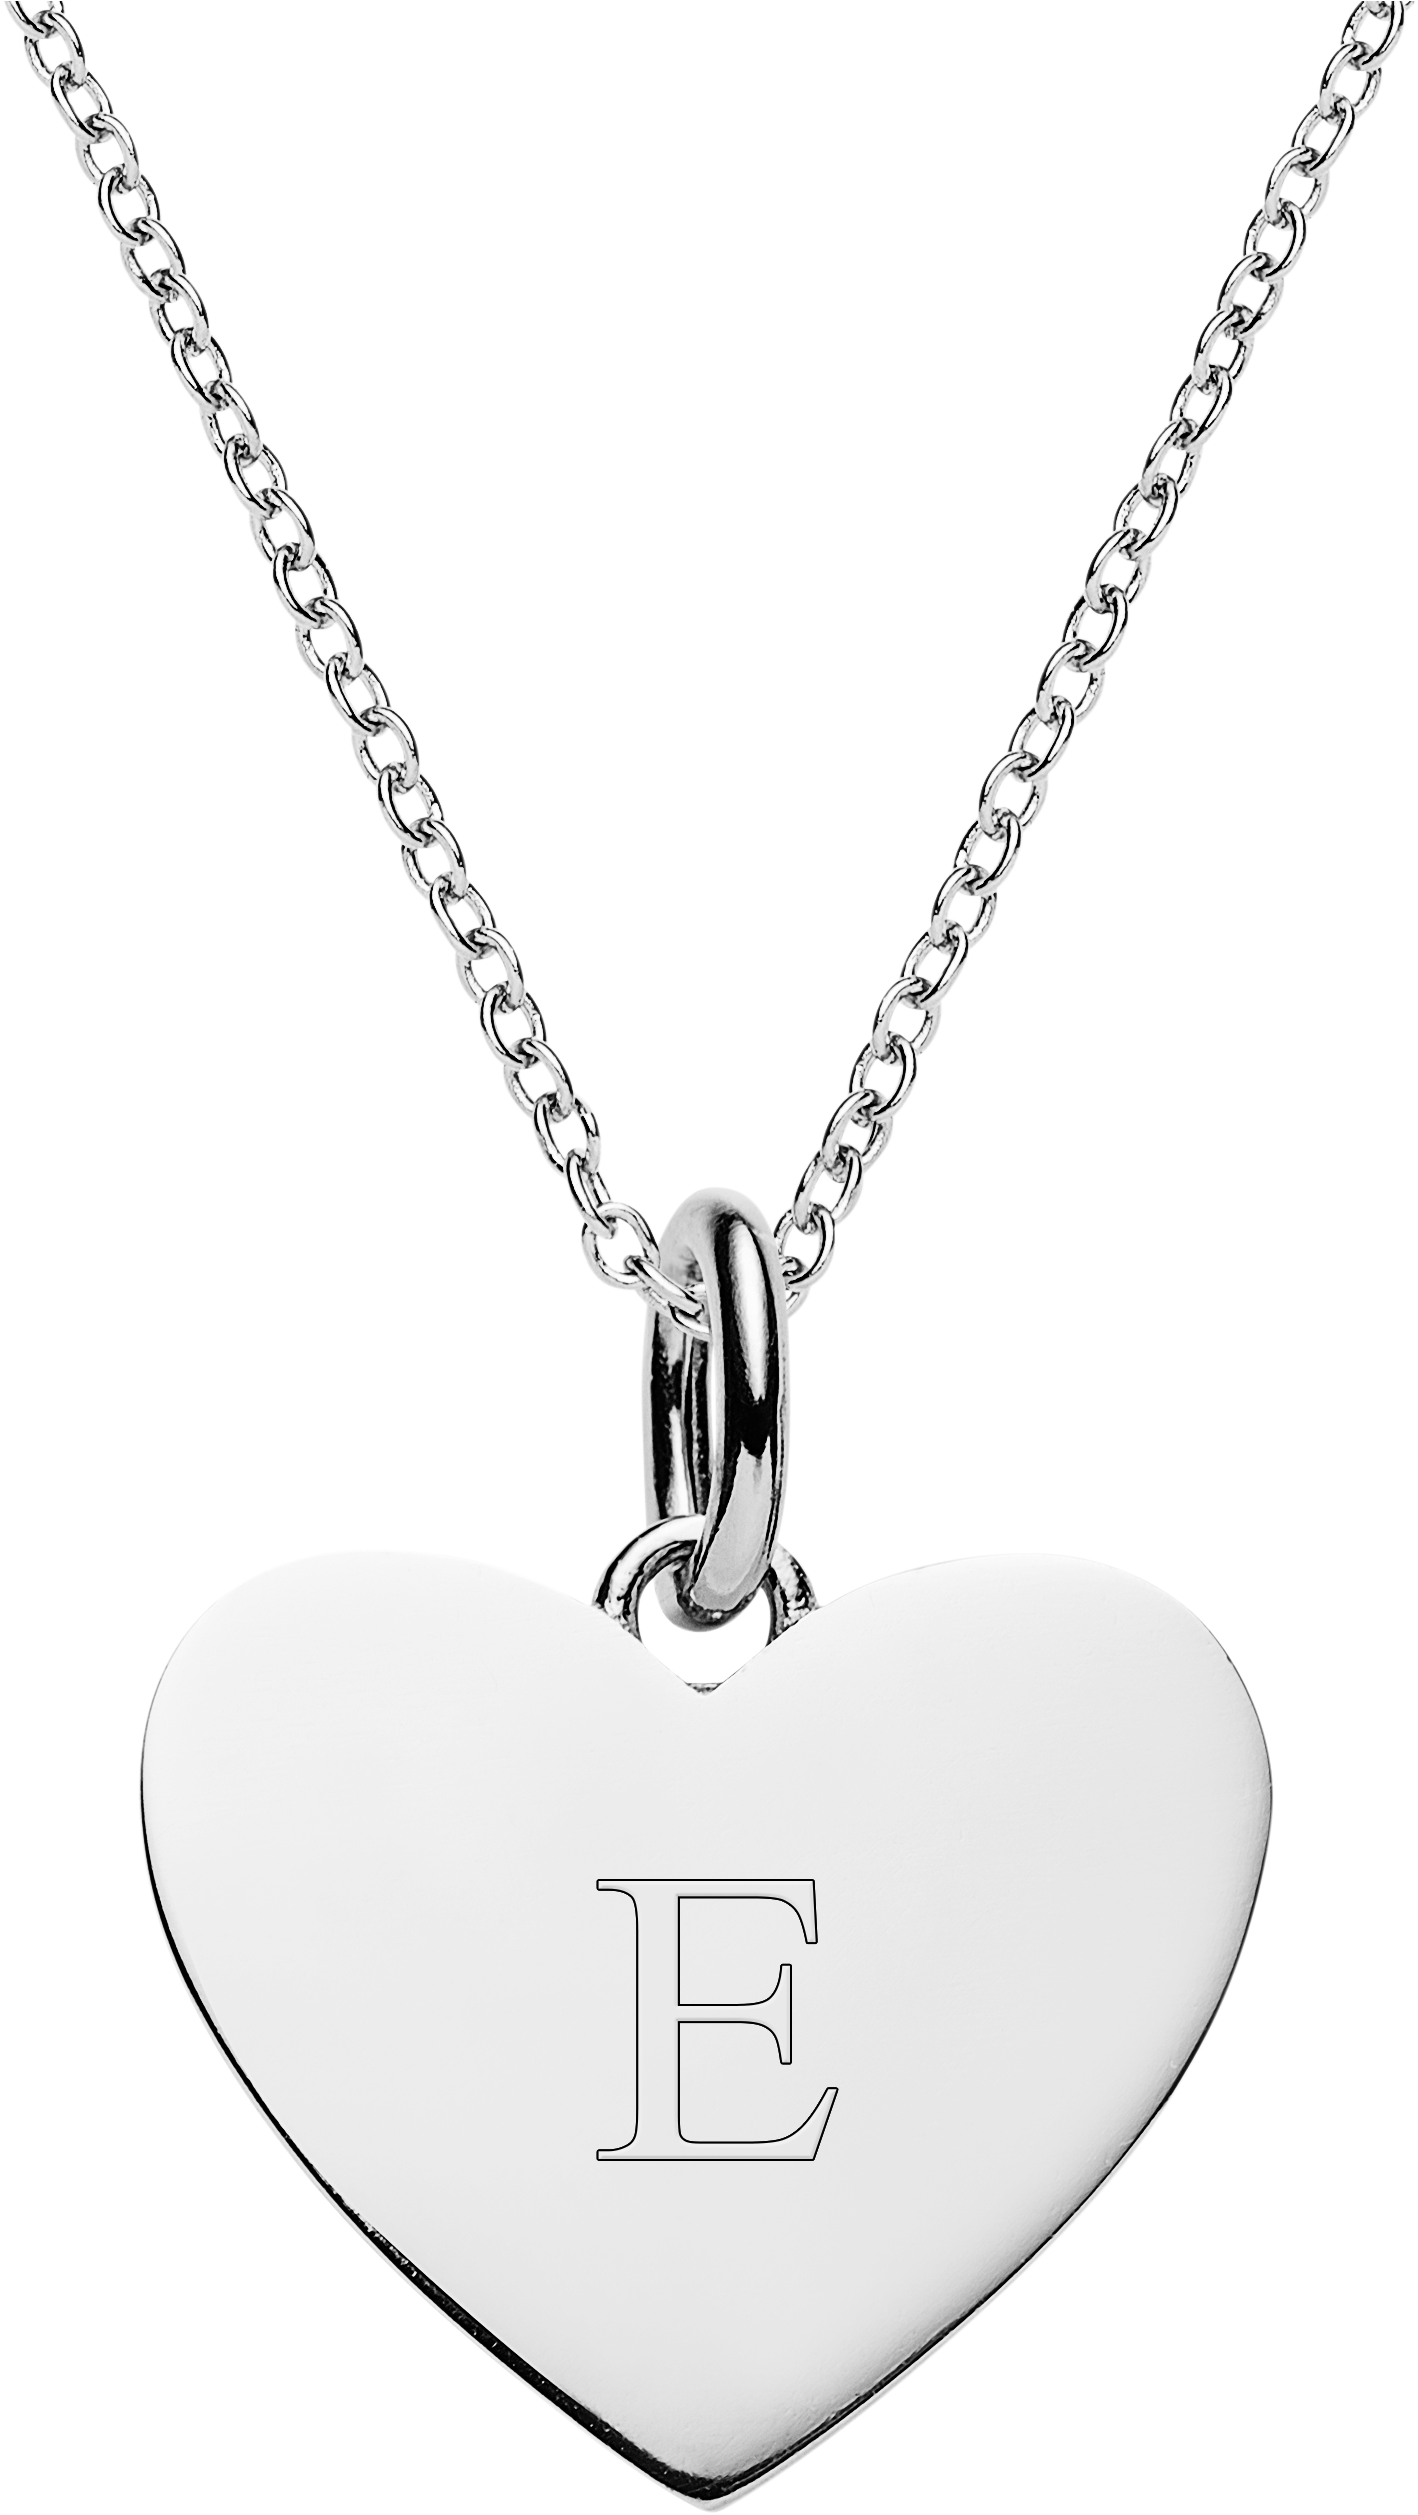 Clip Art Library Download Personalised Silver Heart - Silver Engraved Heart Necklace (2878x2878)